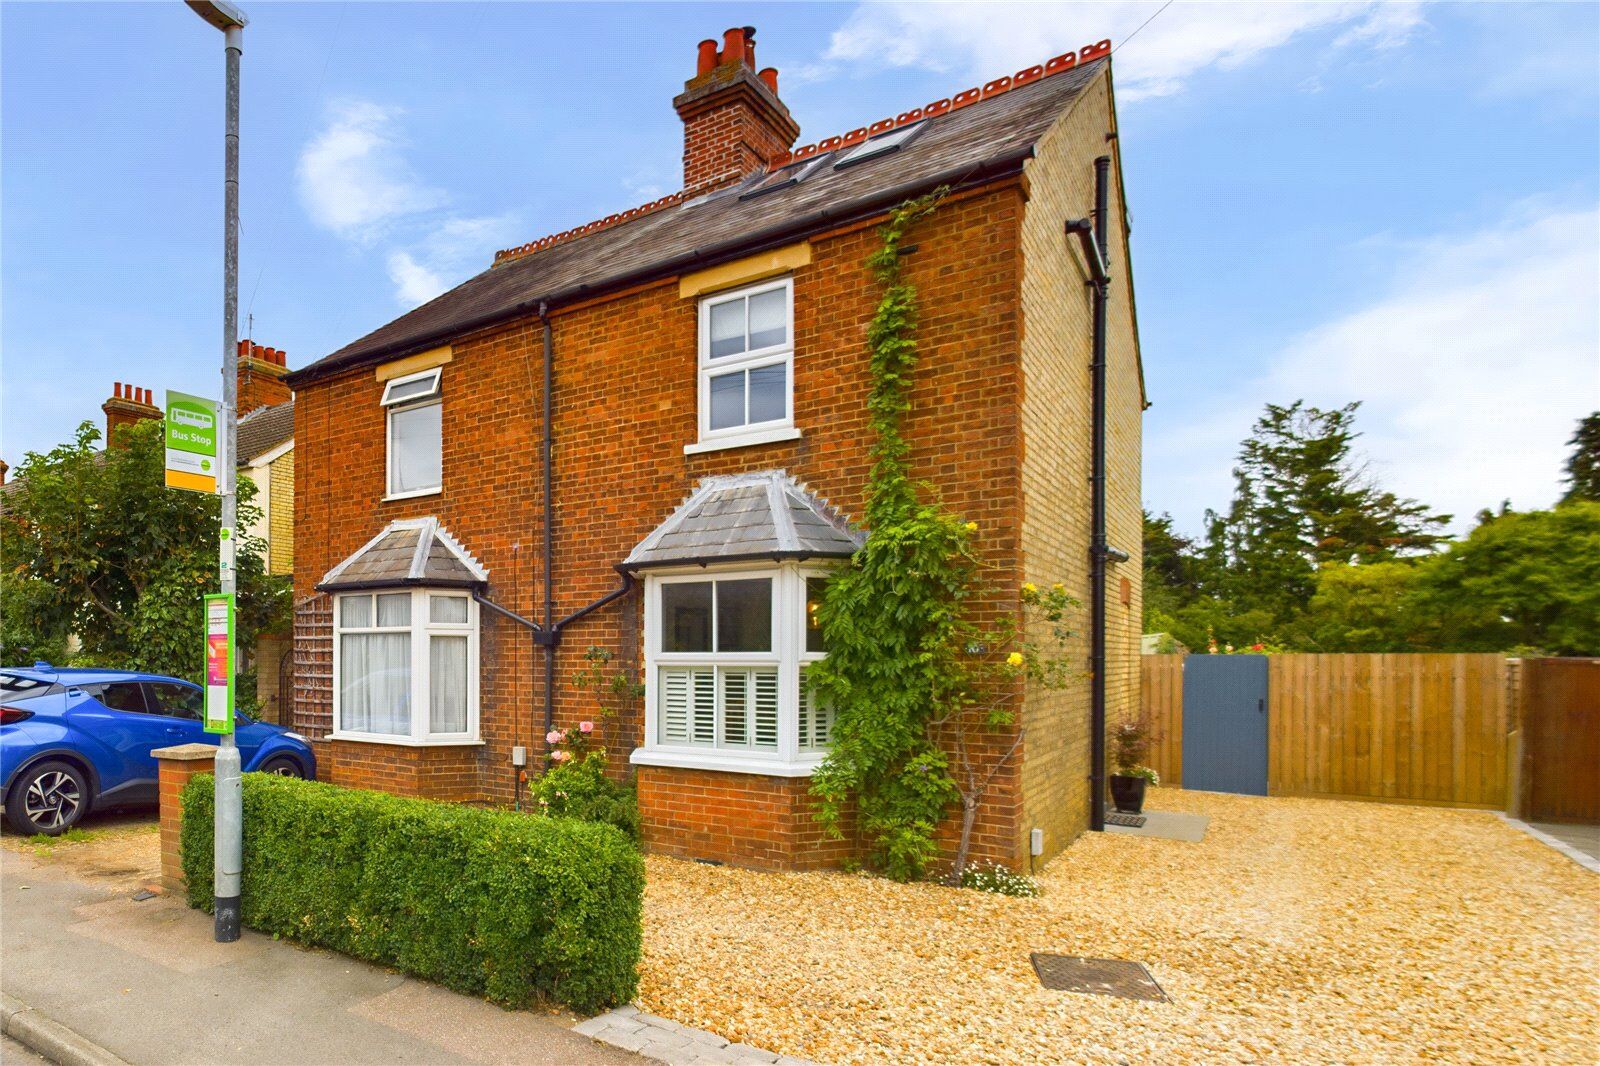 4 bedroom semi detached house for sale Drove Road, Biggleswade, SG18, main image